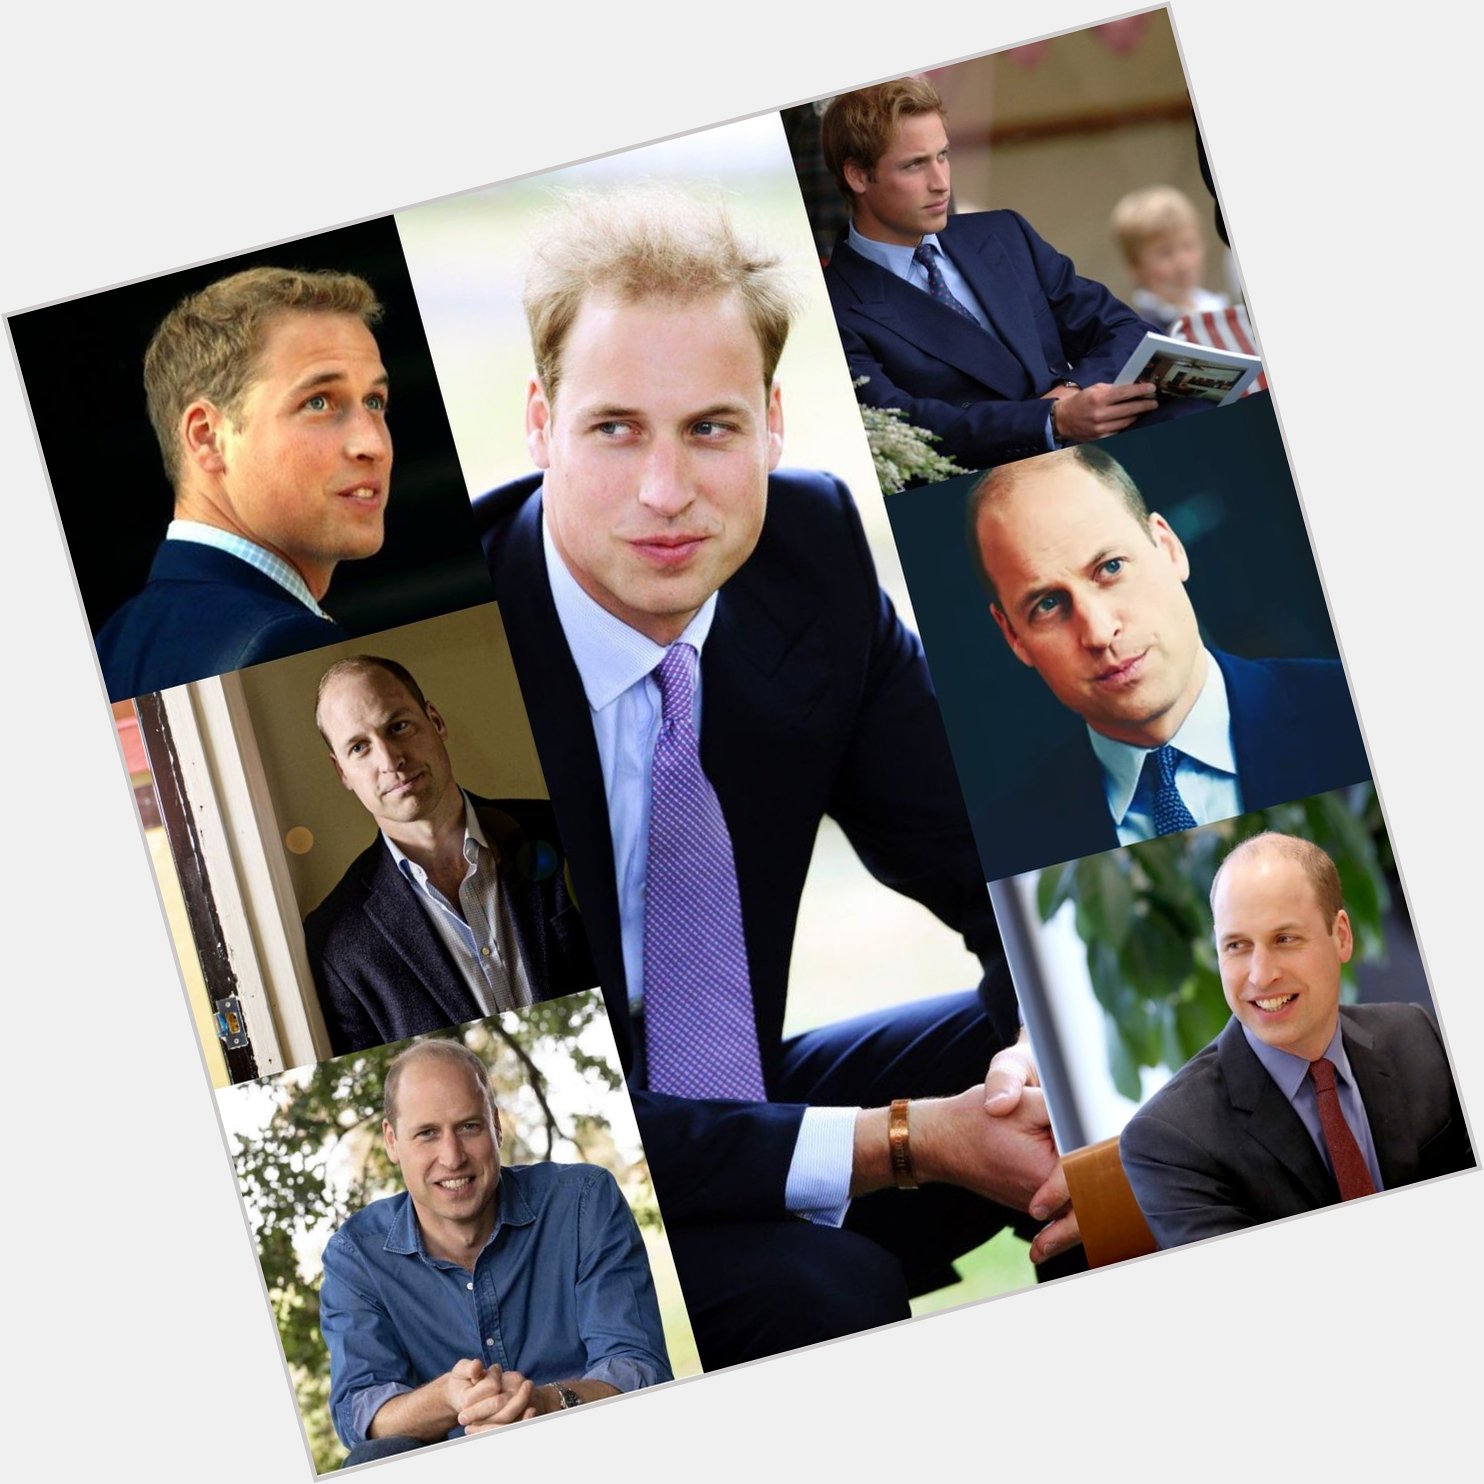 Happy birthday Prince William! Wishing you a year of happiness and joy. 